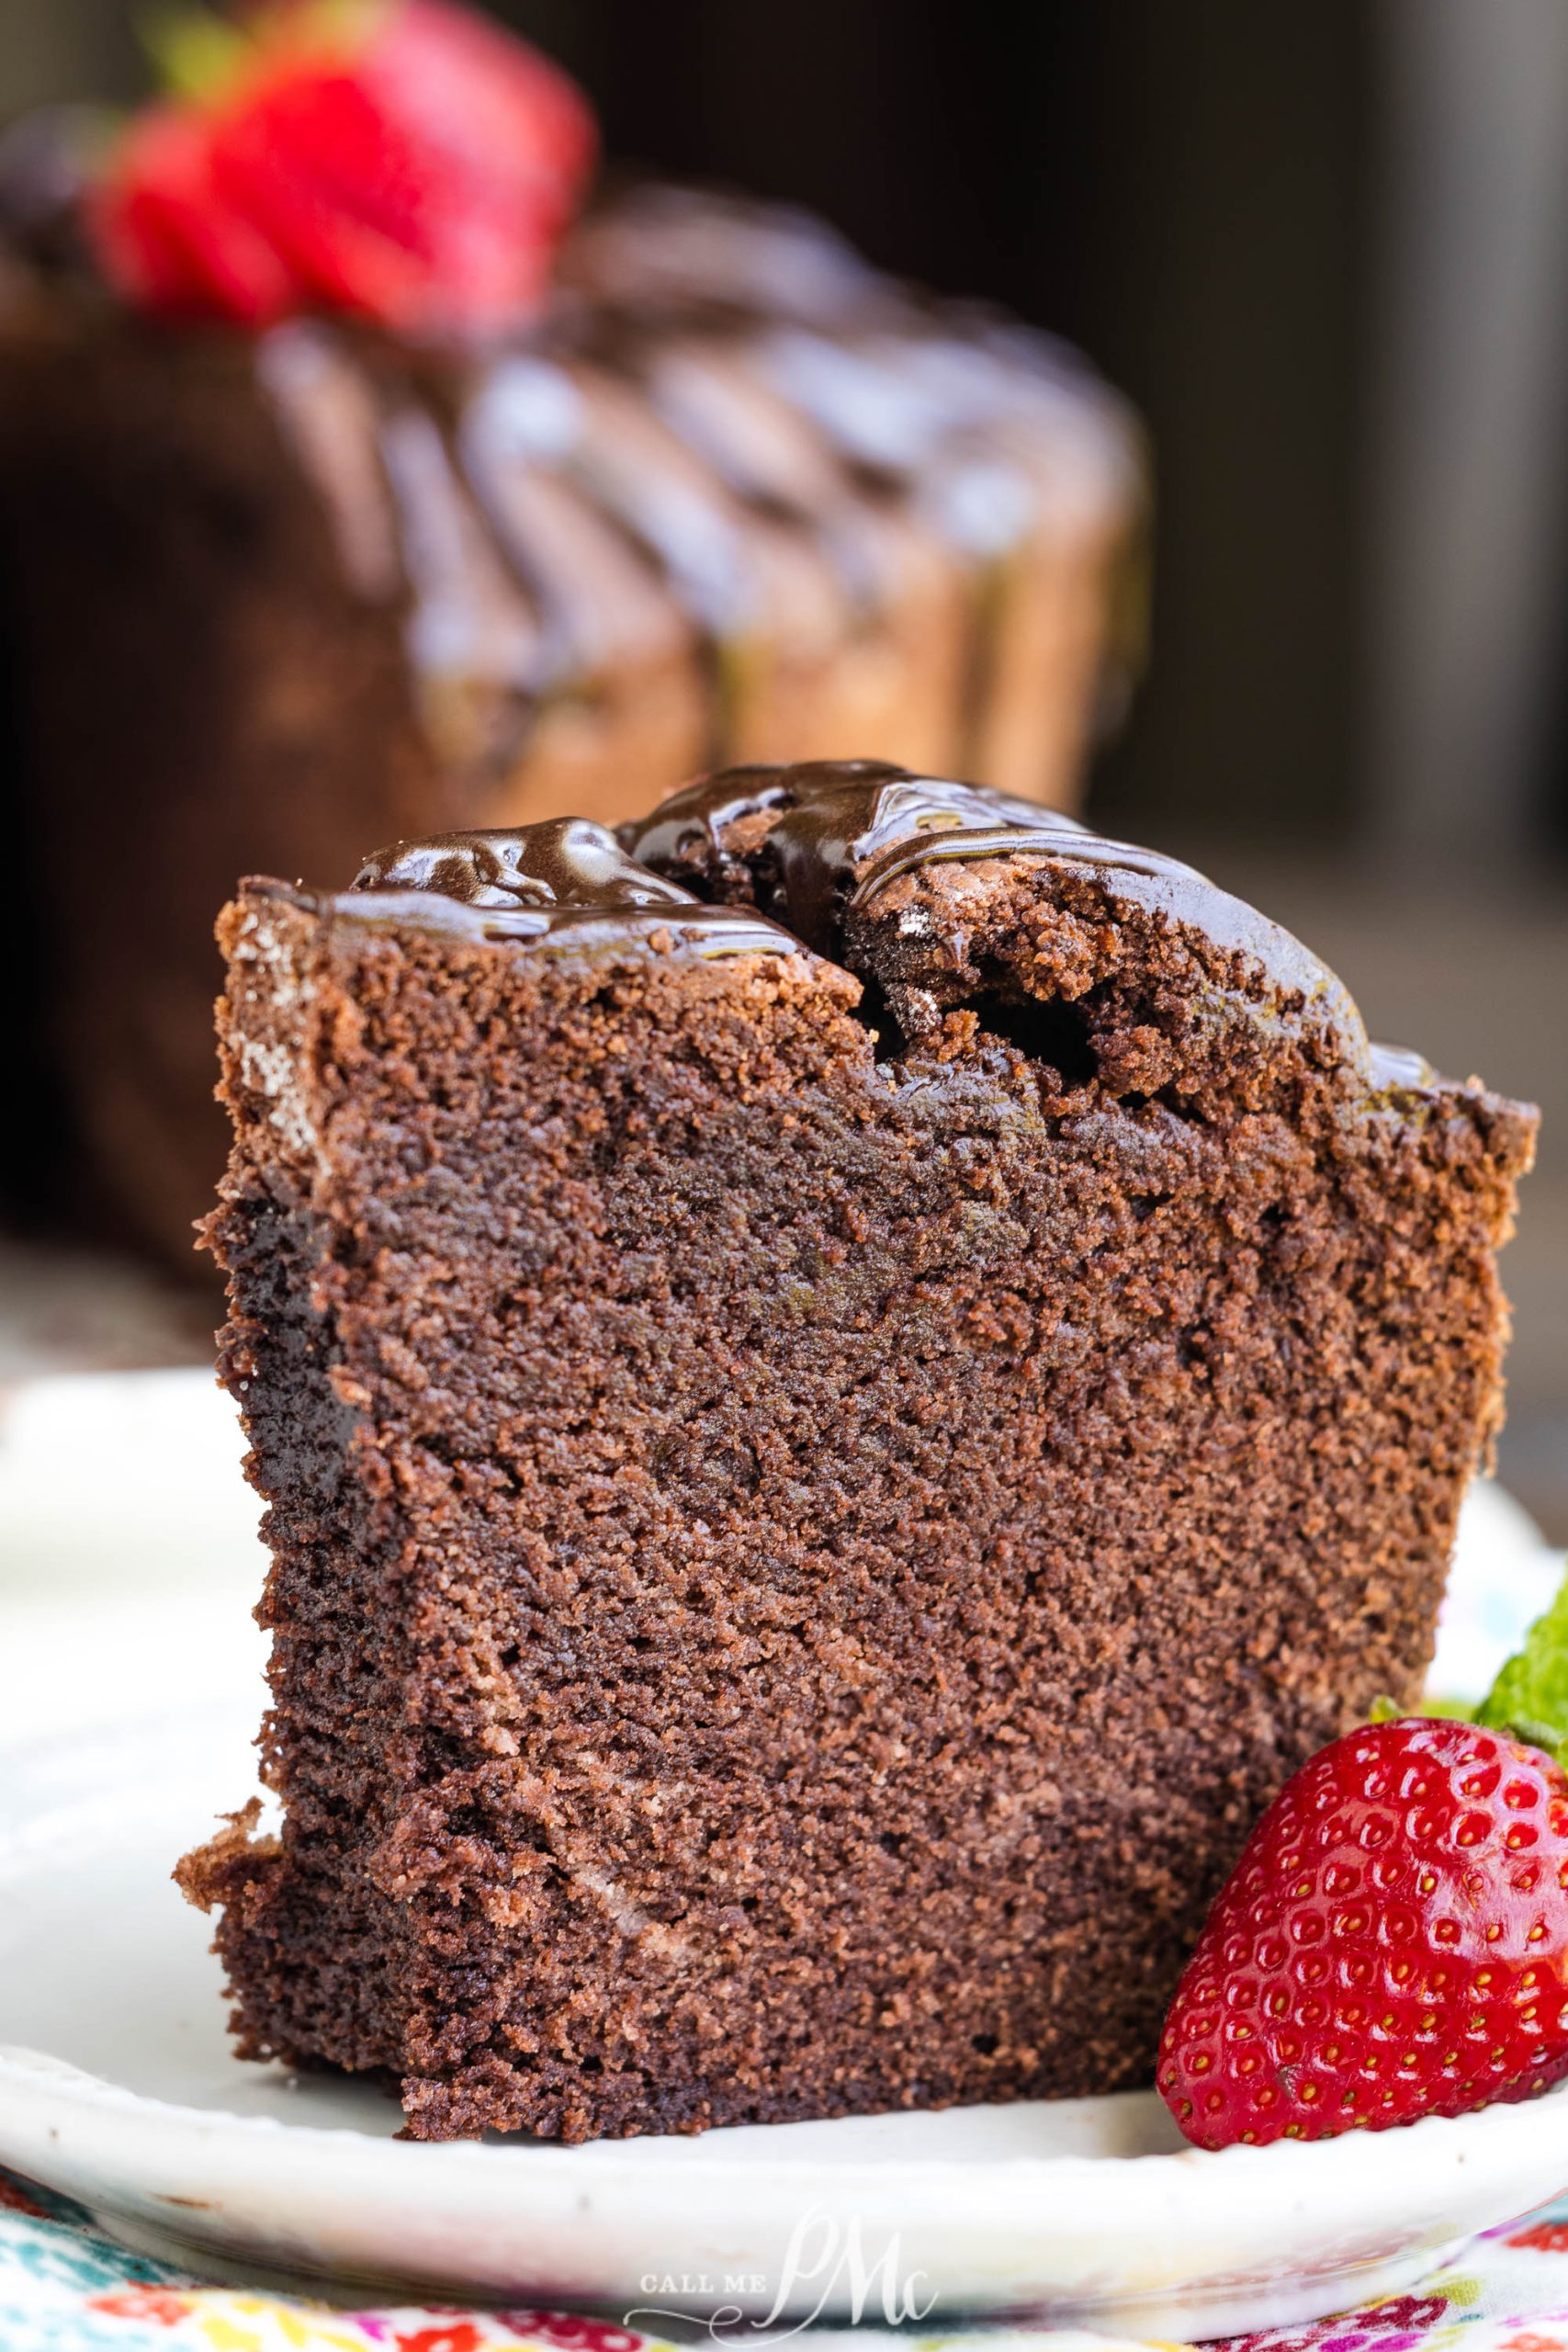 A slice of rich chocolate cake with glossy chocolate icing, served on a white plate, garnished with a fresh strawberry on the side.